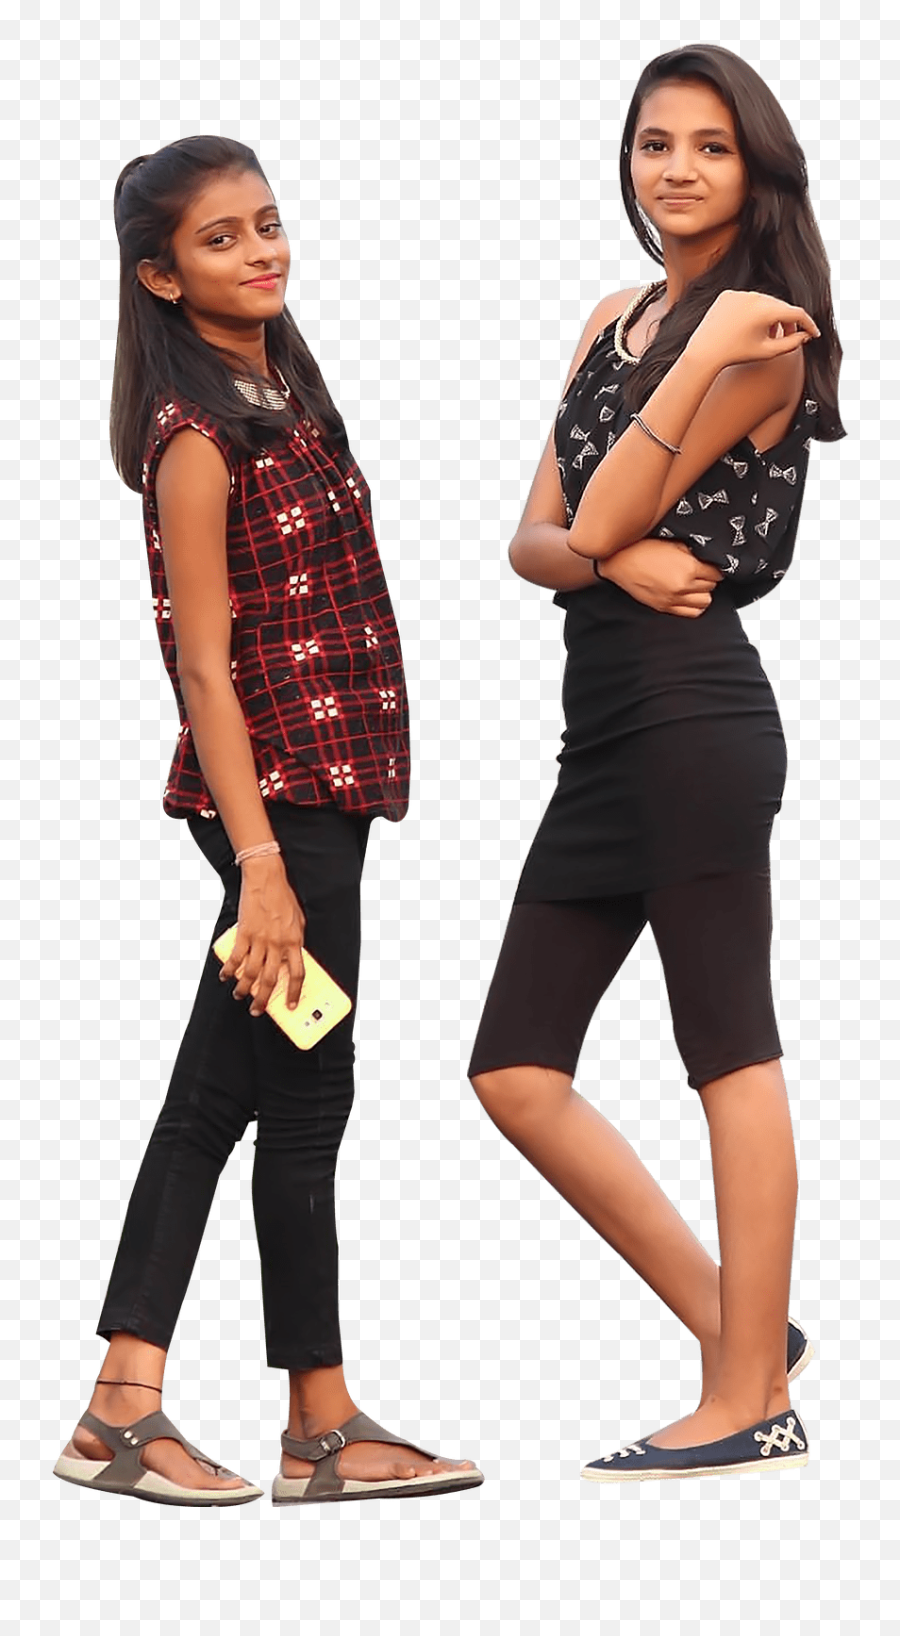 New Girls Png Collection 2019 Download Images For - Full Hd Girls Png,Hair Model Png